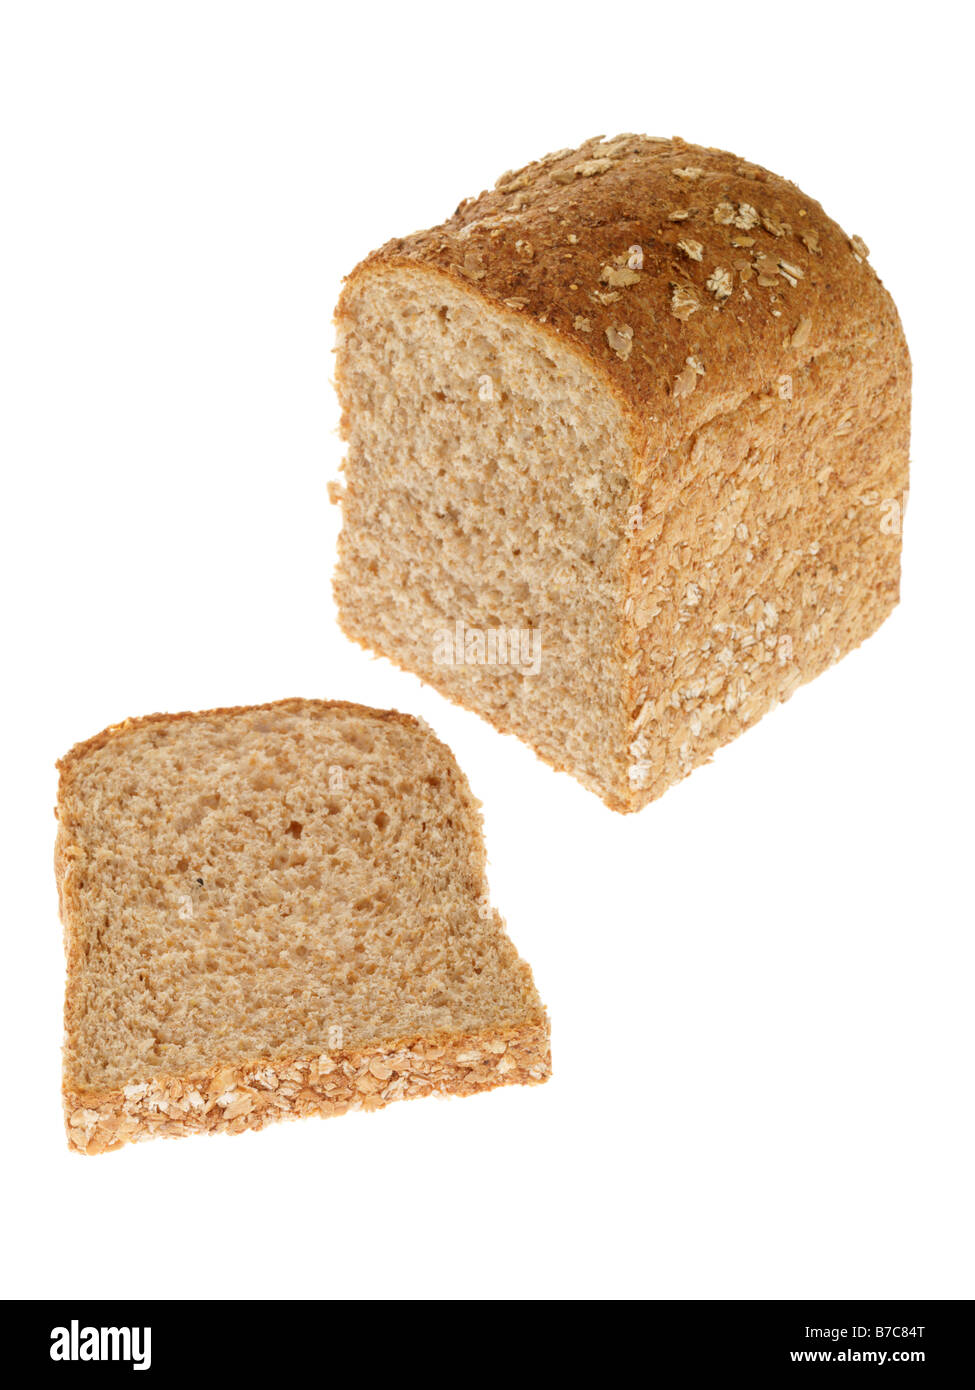 Loaf Of Brown Wholegrain Organic Bread Against A White Background With No People With Copy Space and a Clipping Path Stock Photo